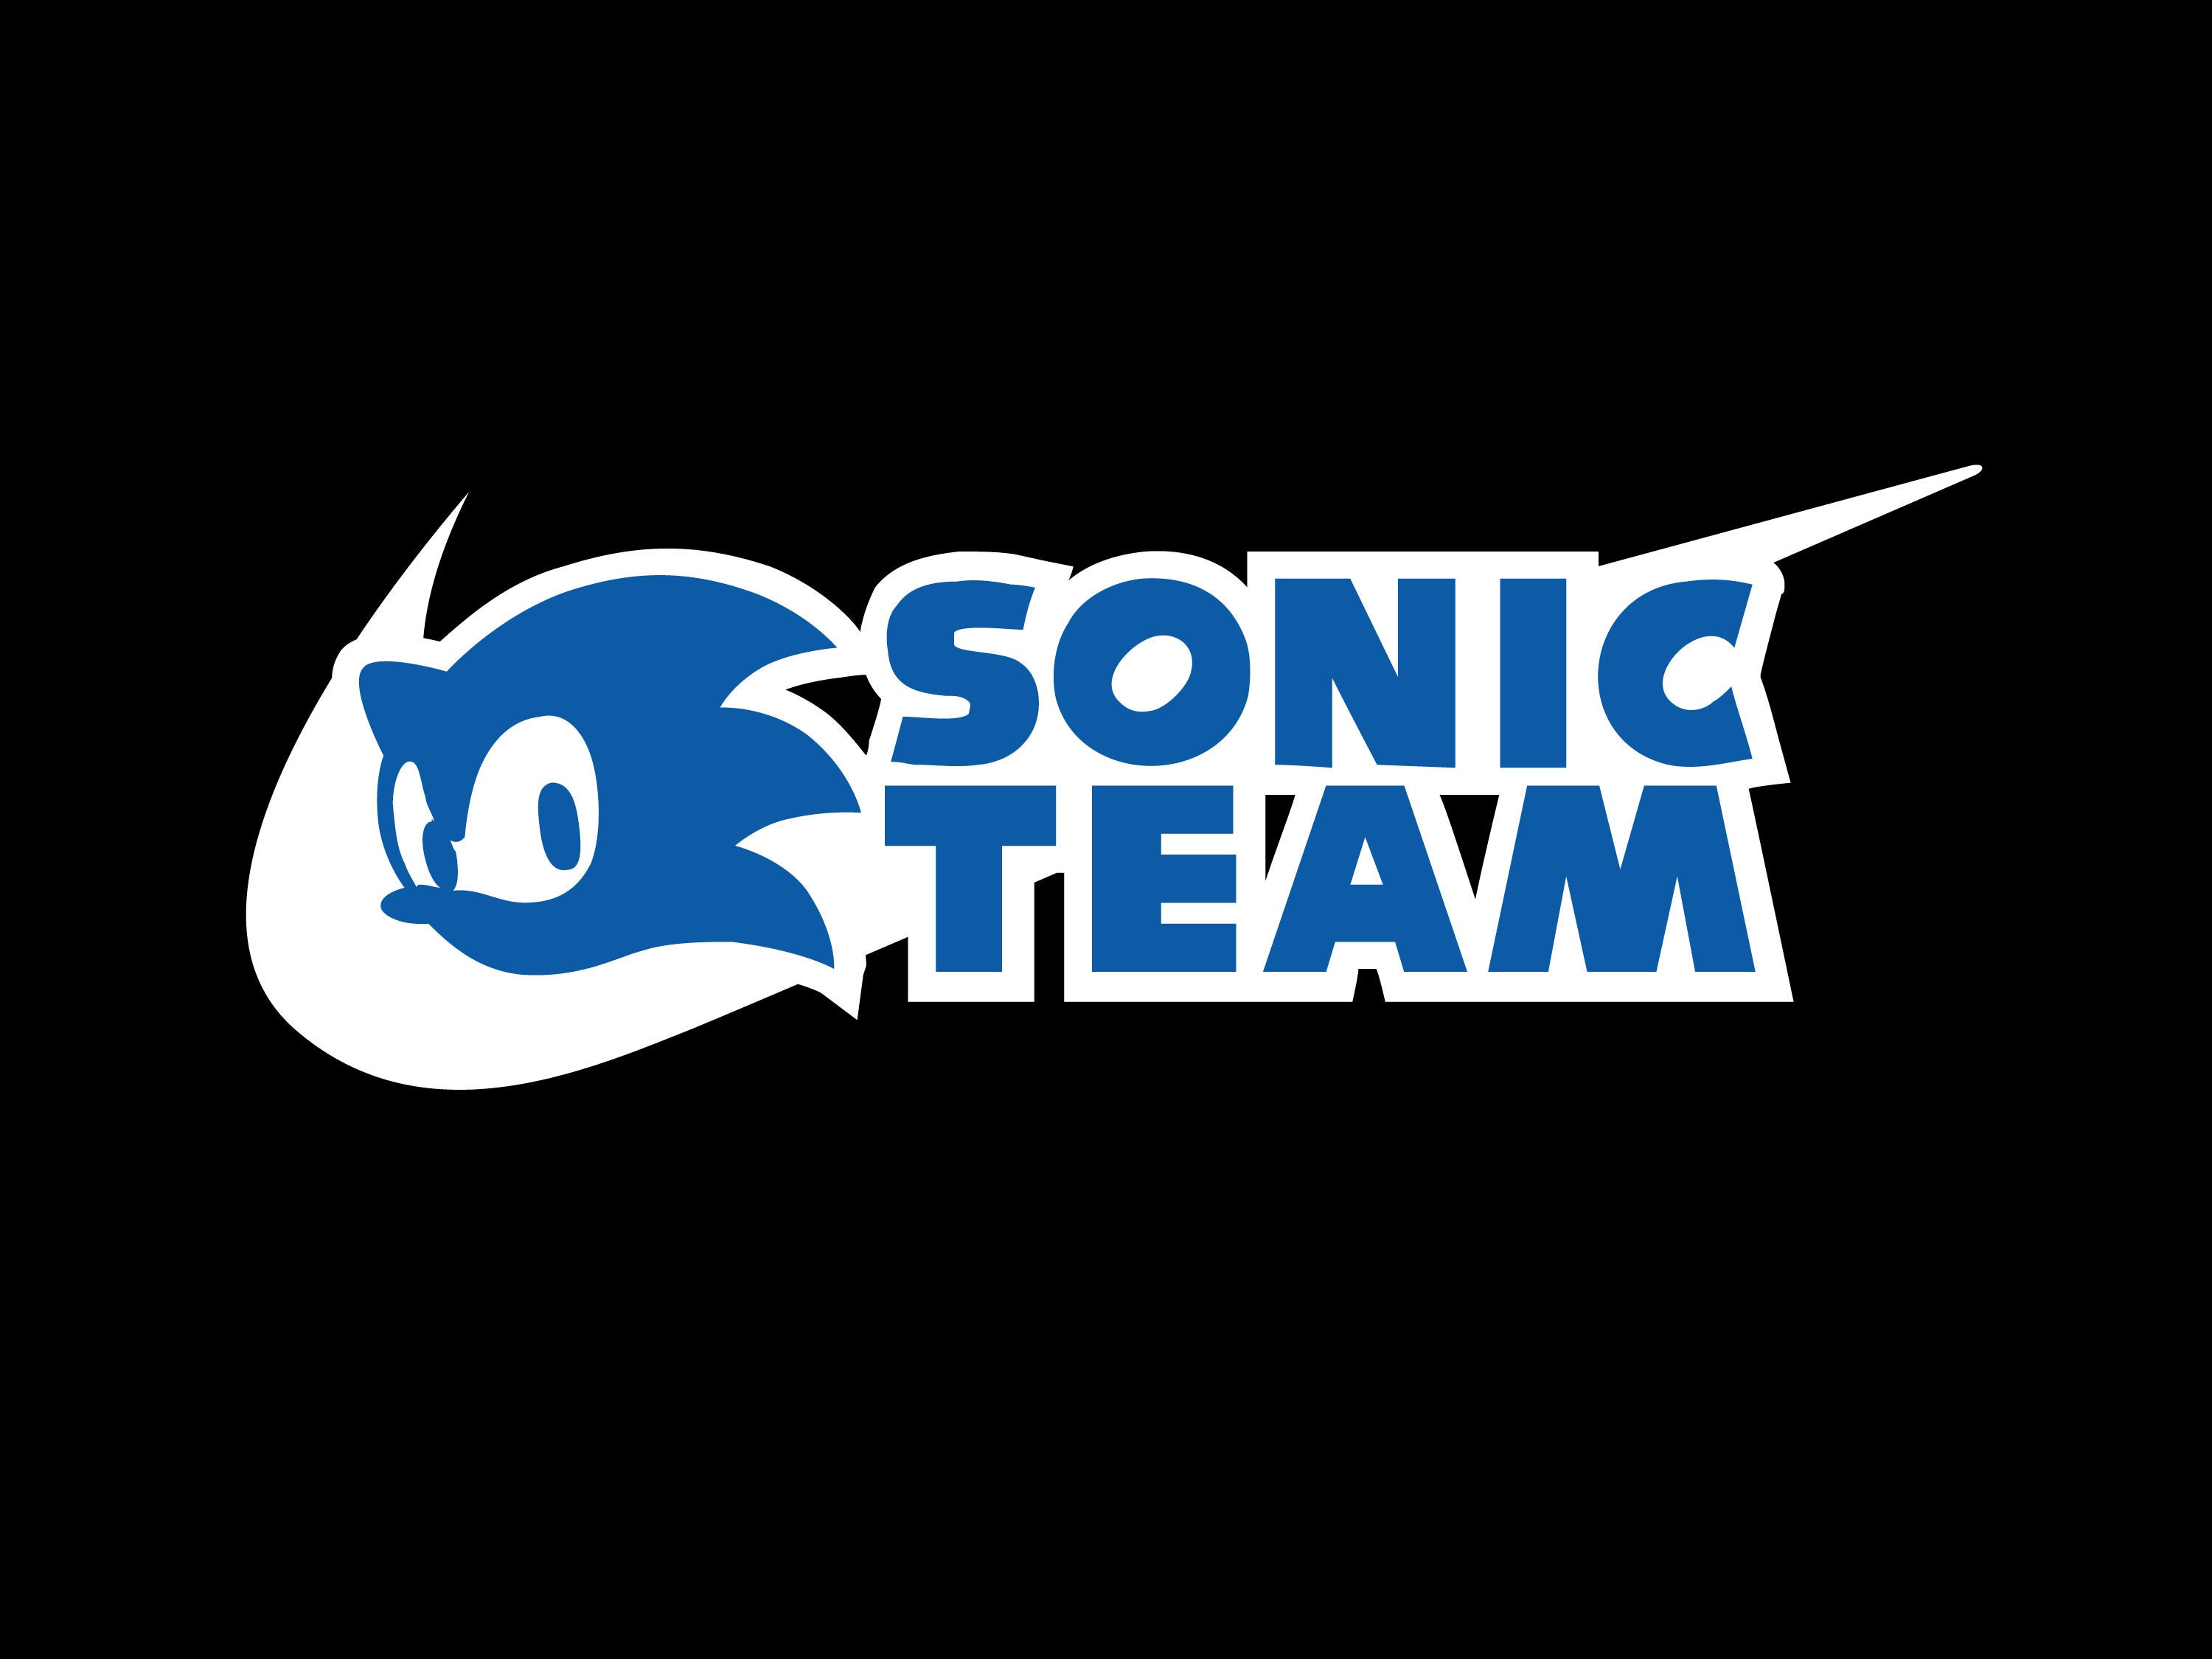 Sonic The Hedgehog Logo PNG Vector (PDF) Free Download